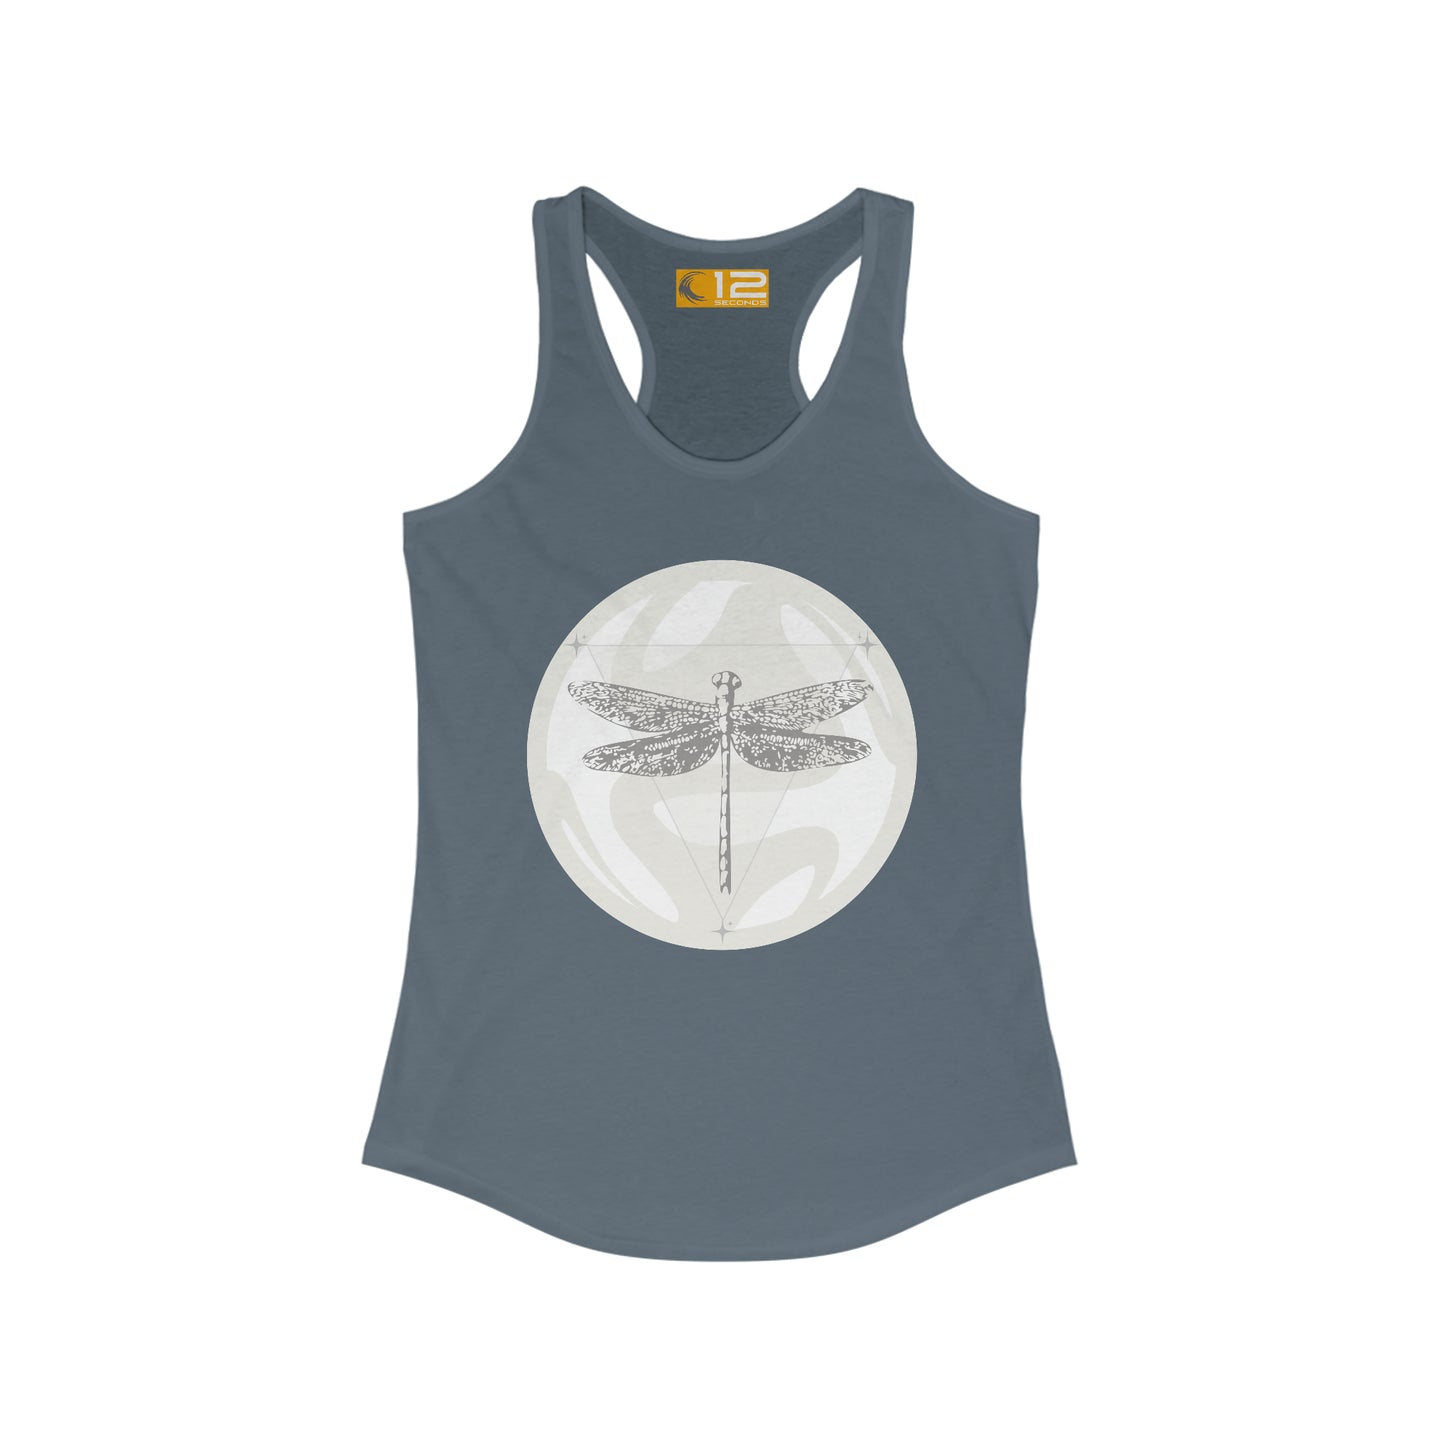 Women's Ideal Racerback Tank - ASTRAL DRAGONFLY - 12 SECONDS APPAREL